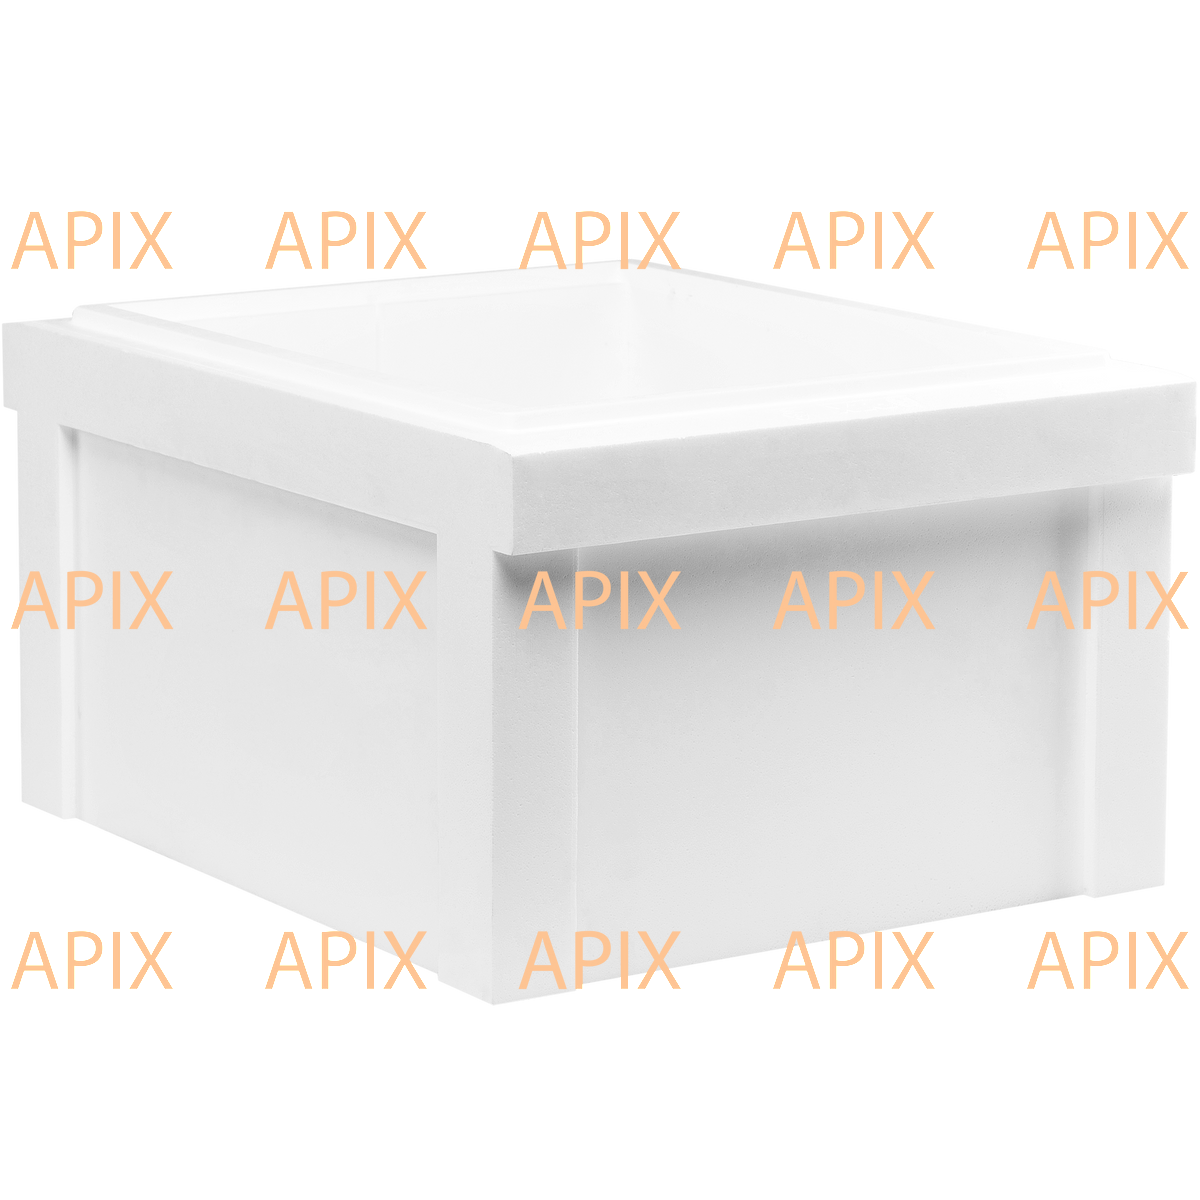 Case for APIX hive for 10 frames 300 mm with handles